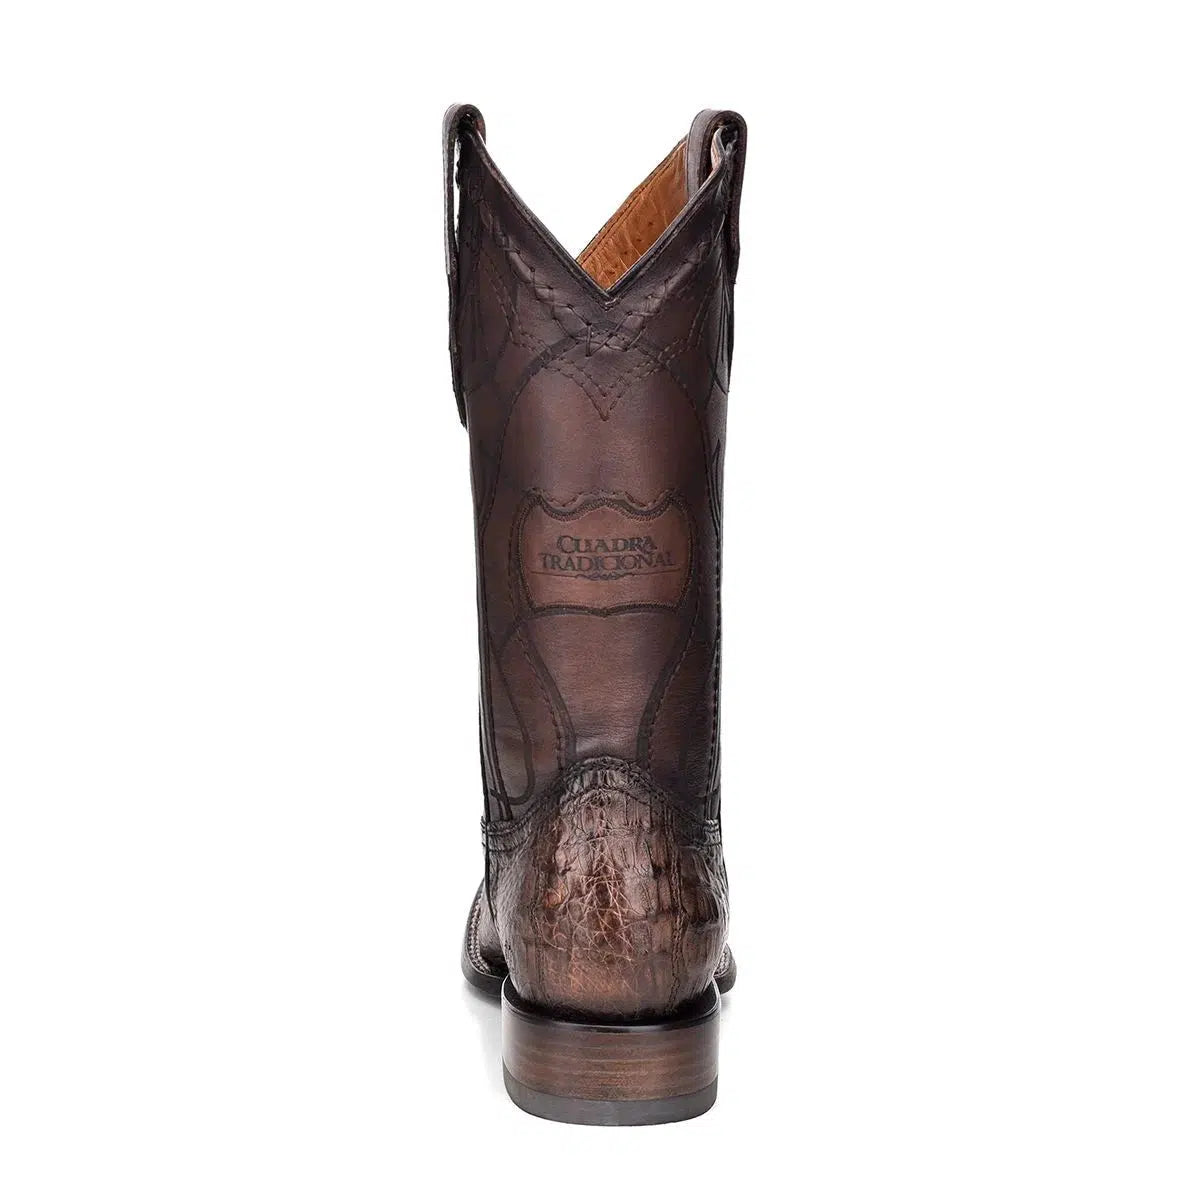 3Z1OFY - Cuadra brown western cowboy rodeo caiman leather boots for men-Kuet.us